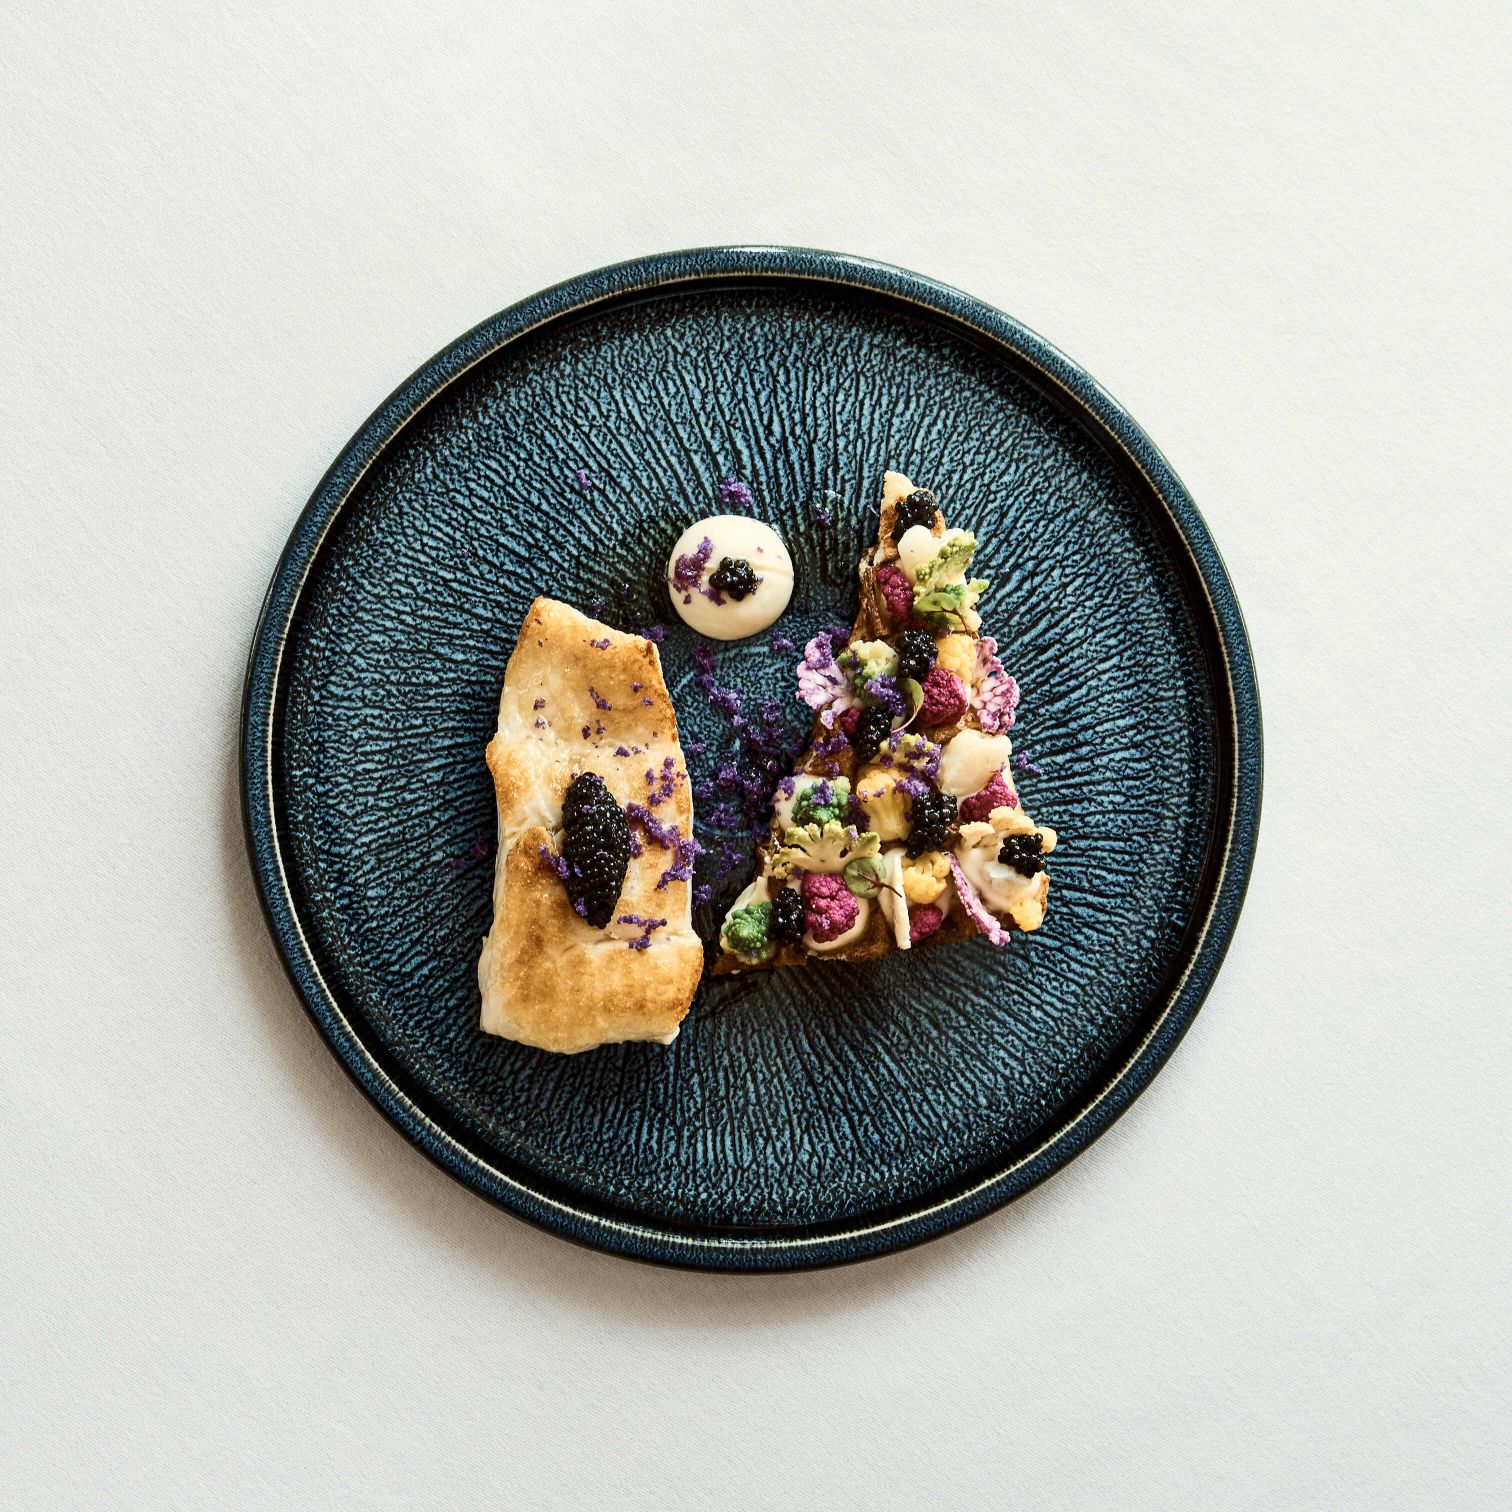 A Plate Of Food